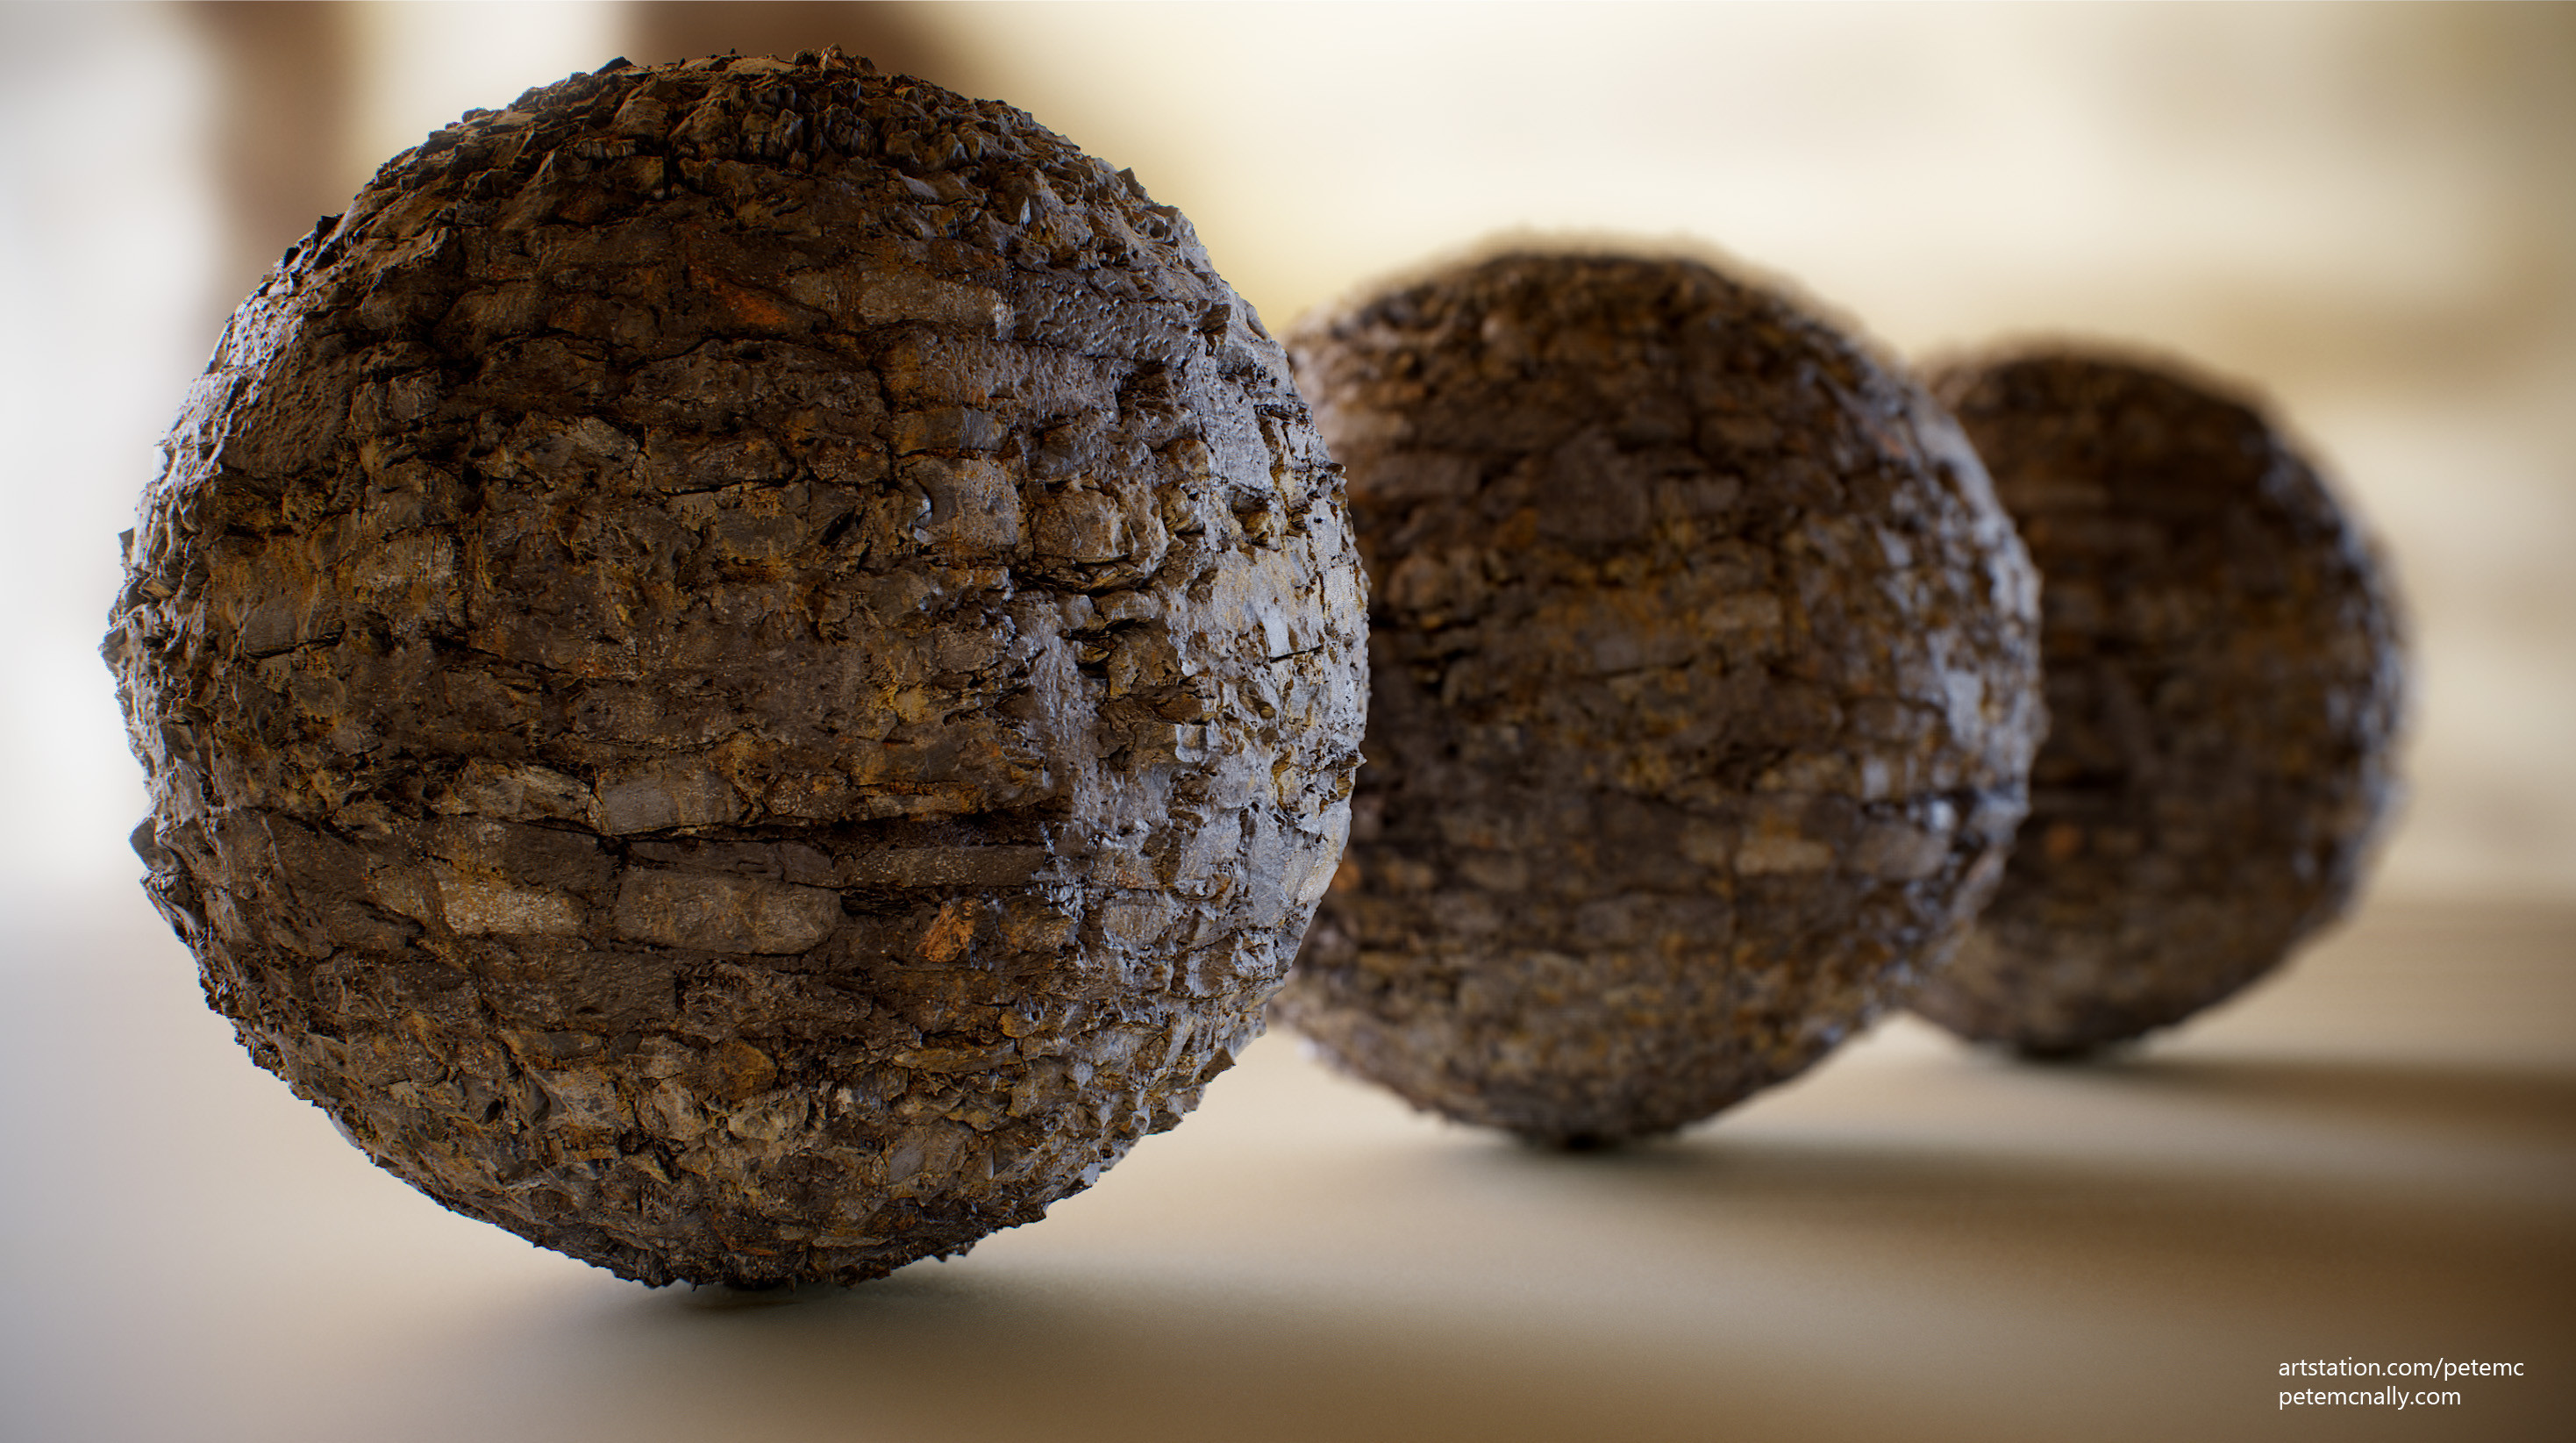 Previously published stone wall material, re-lit with raytracing